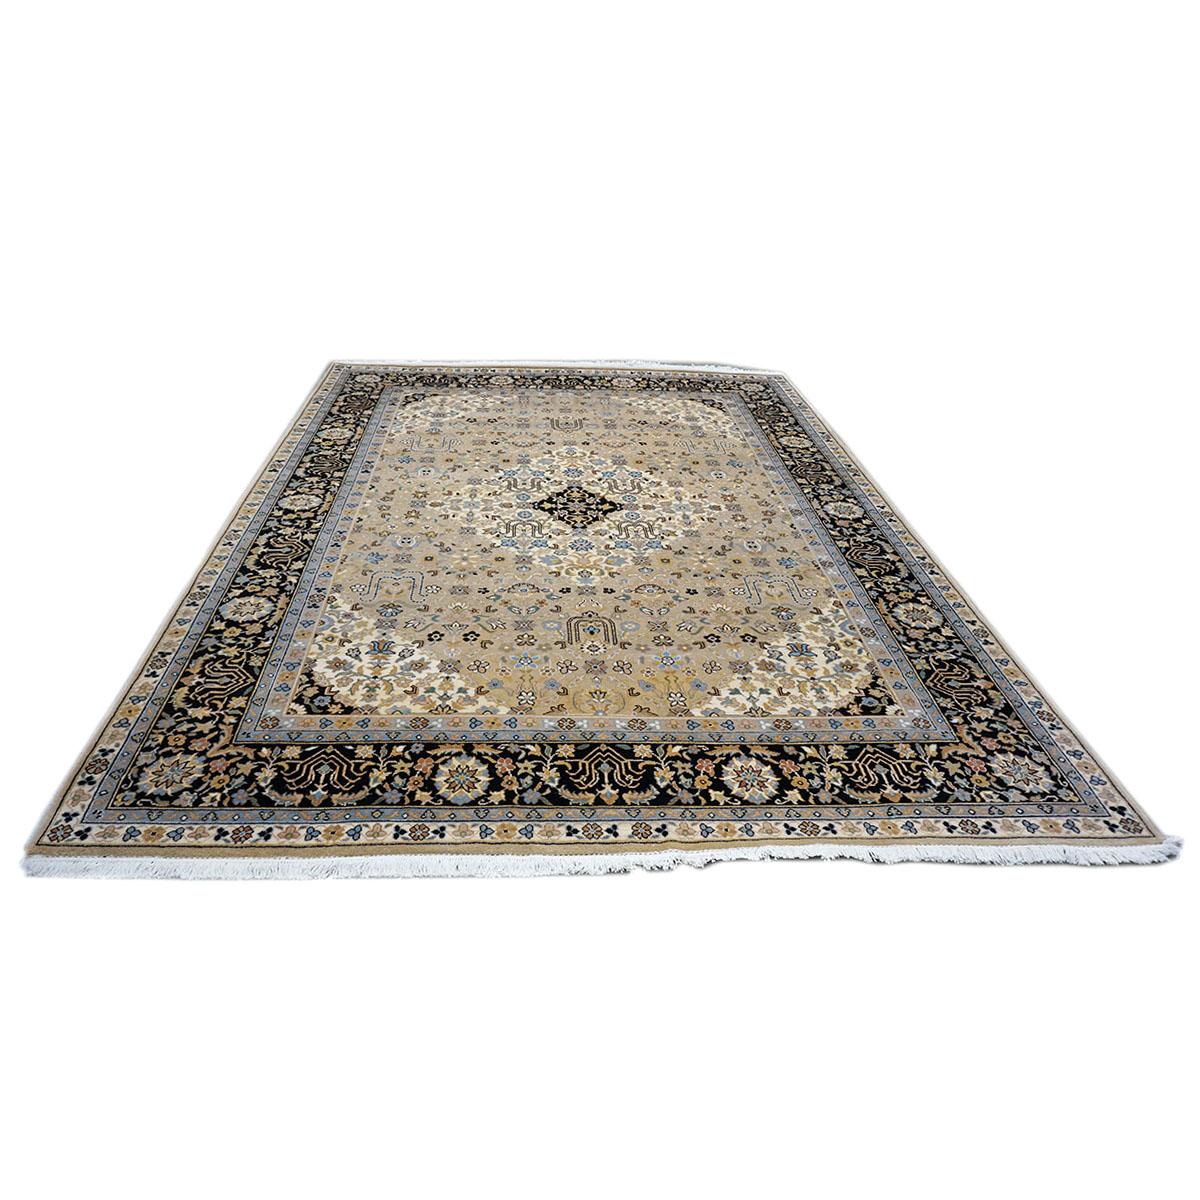 Ashly Fine Rugs presents a 21st century Romanian Tabriz. Tabriz is a northern city in modern-day Iran and has forever been famous for the fineness and craftsmanship of its handmade rugs. This piece is a Romanian Tabriz, which means it was handmade